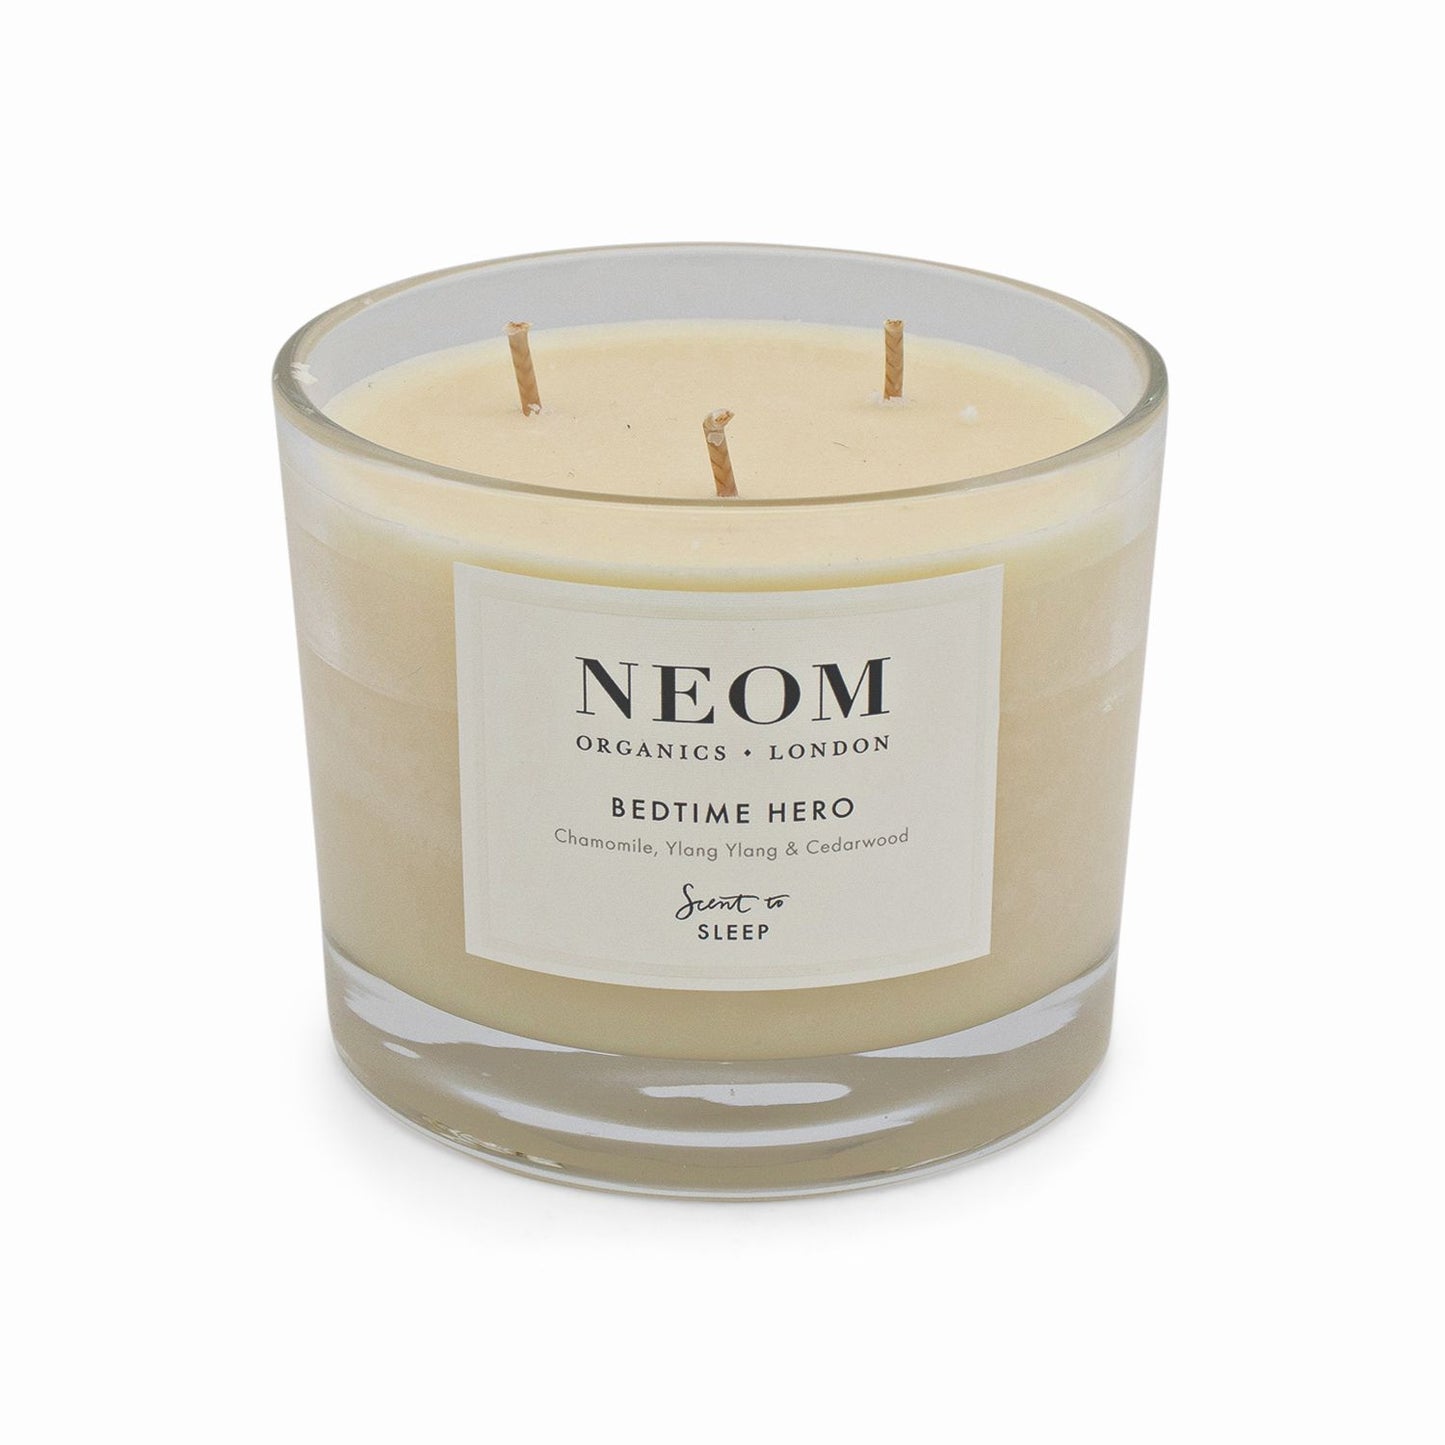 NEOM Scent To Sleep Bedtime Hero Scented 3 Wick Candle 420g - Imperfect Box